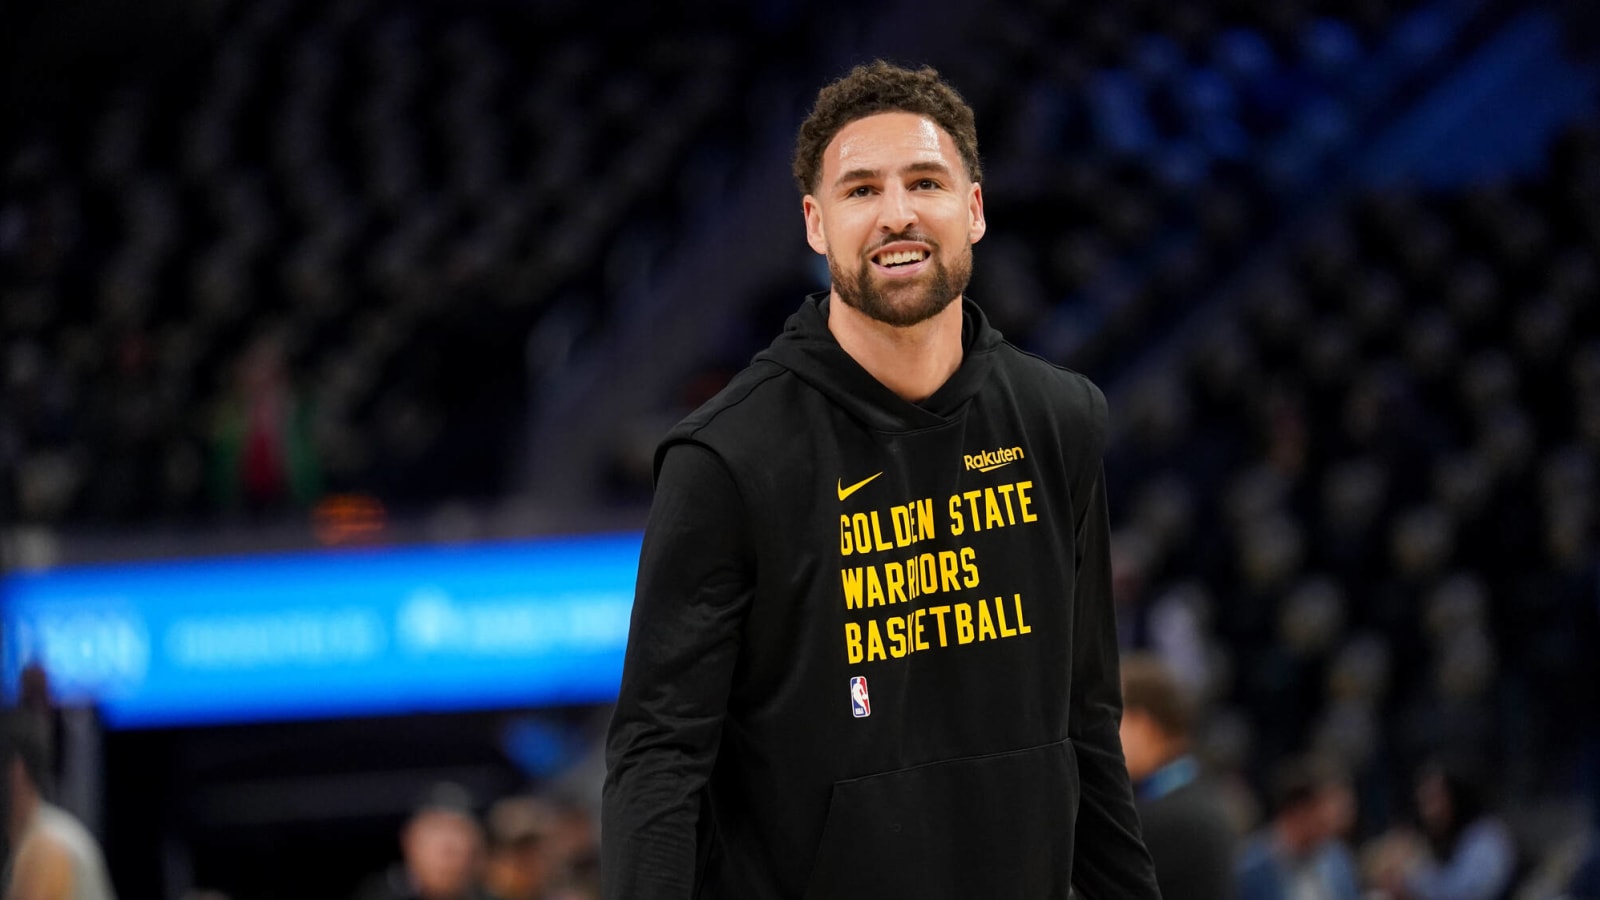 Golden State Warriors: Klay Thompson Names 1 Teammate Who Is the ‘Future of the Franchise’